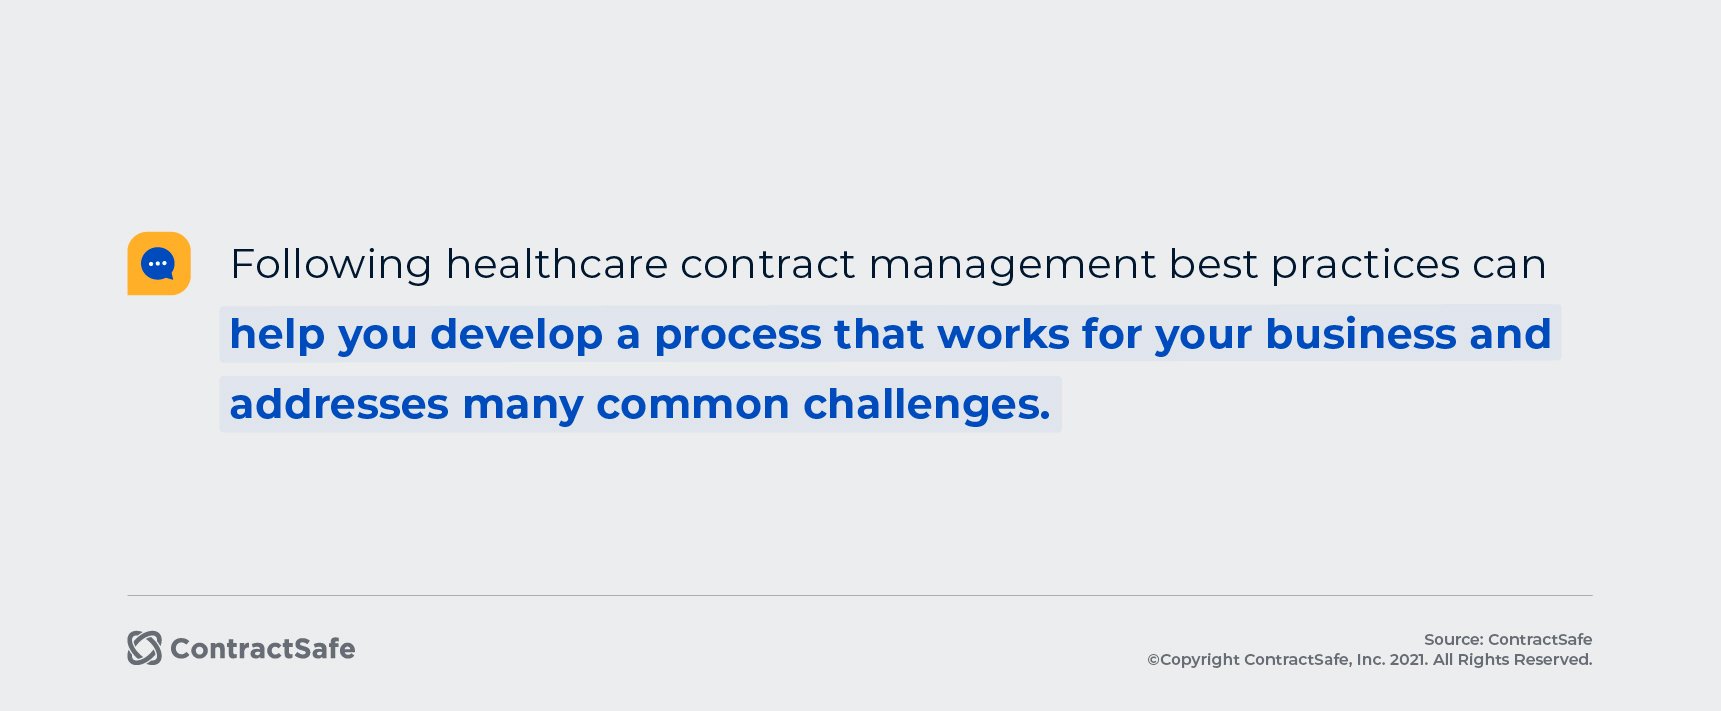 ContractSafe-Blog-What-Is-Contract-Management-in-Healthcare-IMAGES-2